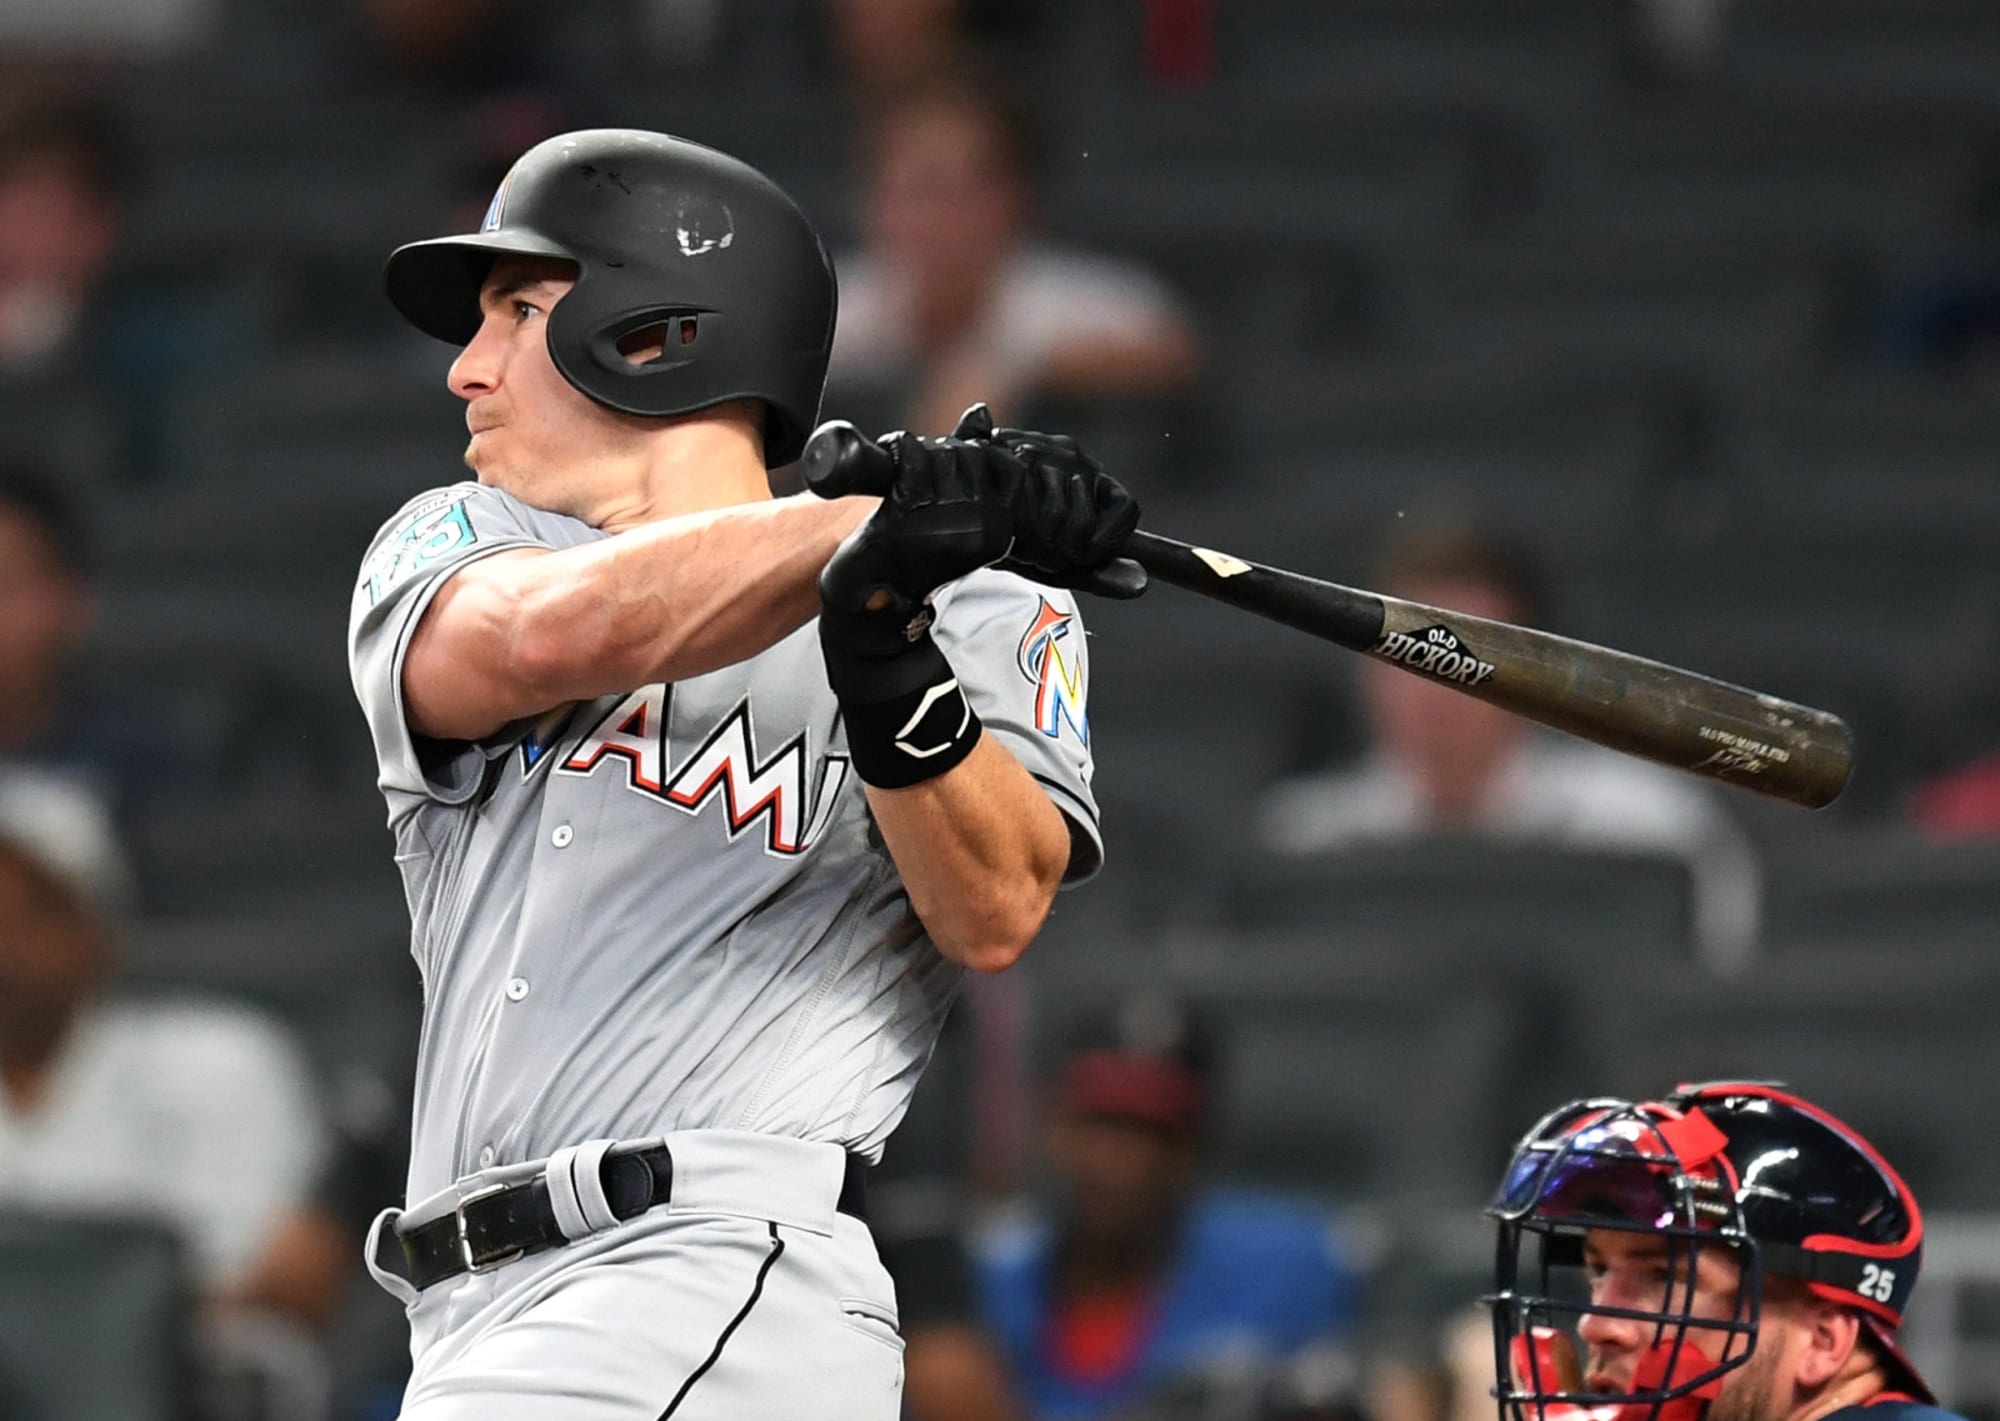 J.T. Realmuto trade rumors: The five best fits for the Marlins